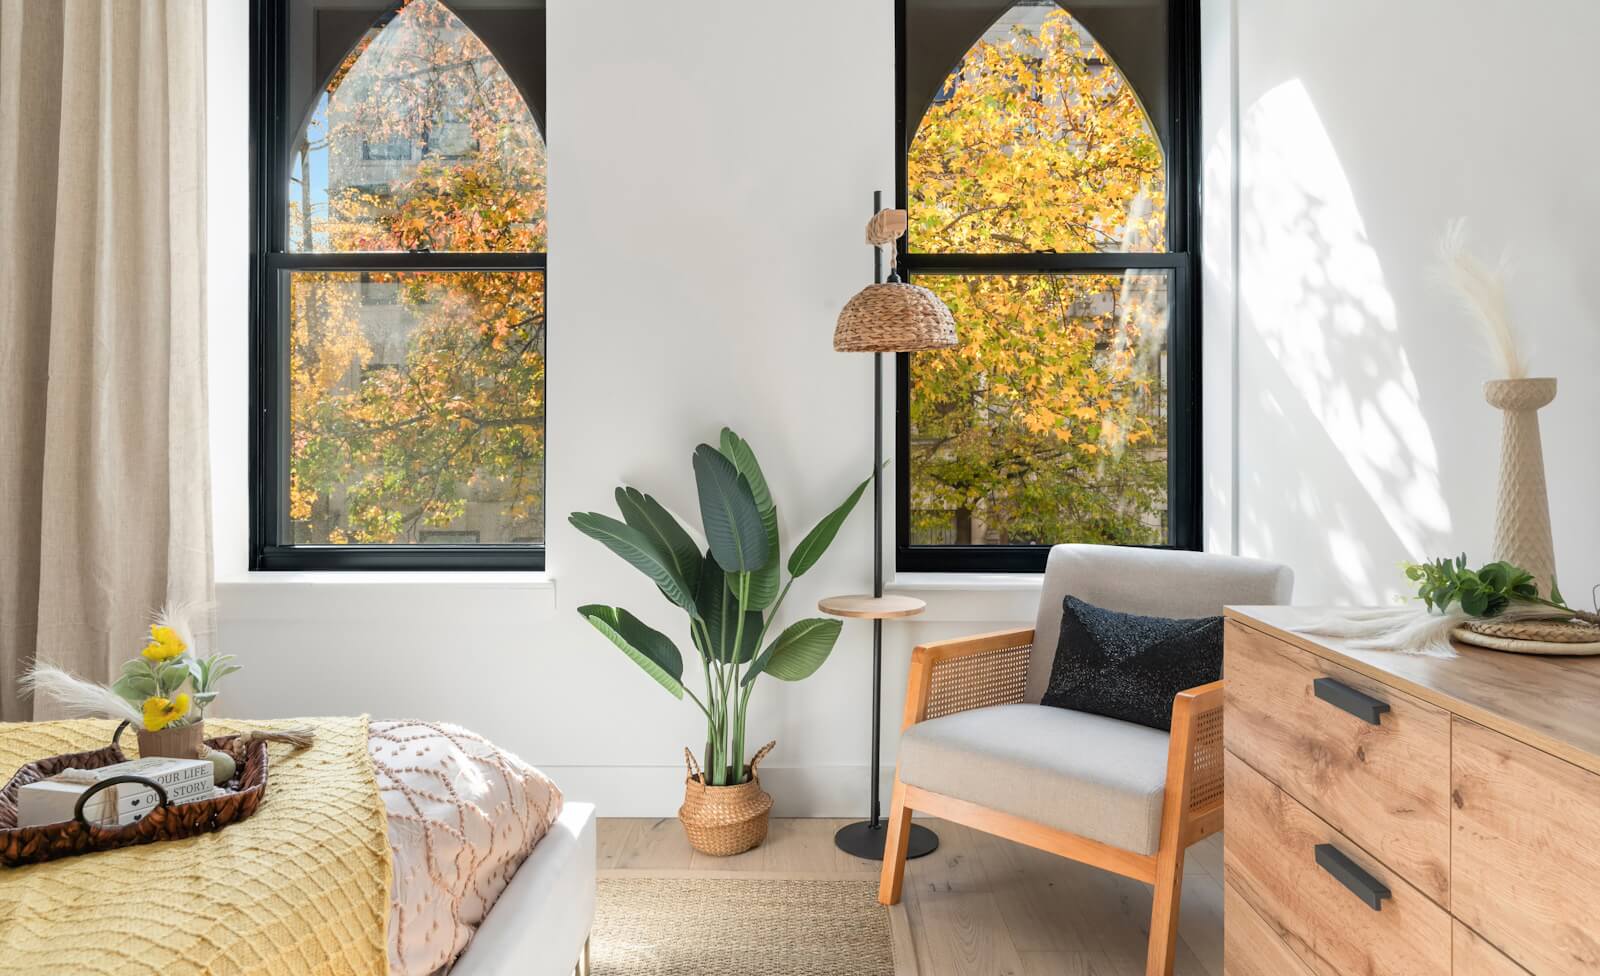 Stylish condo bedroom overlooking tree-lined street in Hamilton Heights Harlem at 463 West 142nd Street condos in NYC.